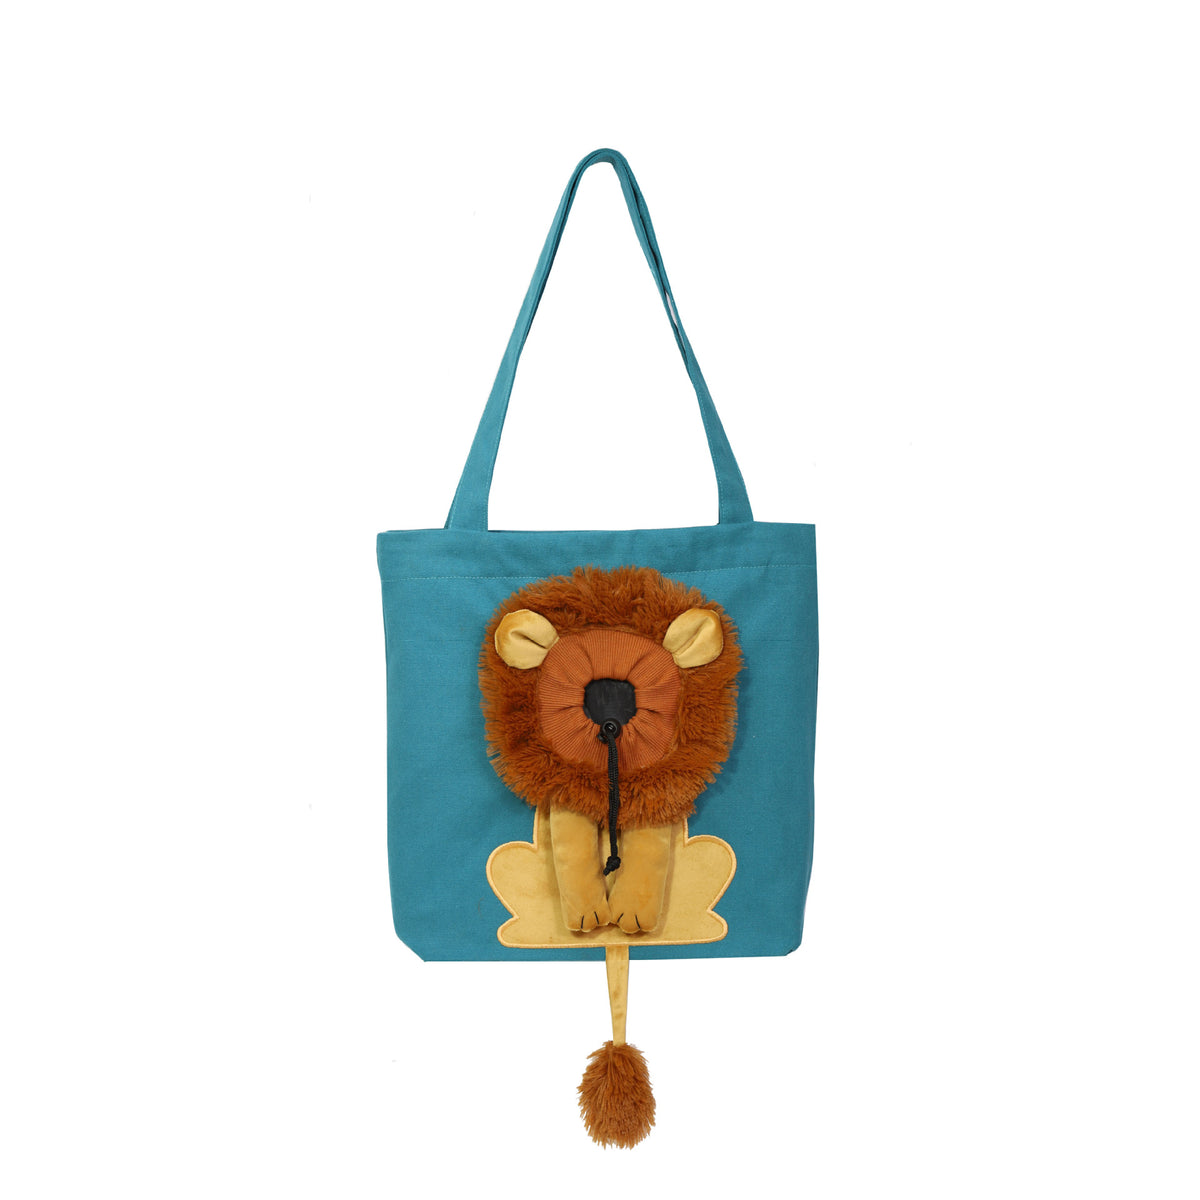 Soft Pet Carriers Lion Design Portable Breathable Bag Cat Dog Carrier Bags Outgoing Travel Pets Handbag With Safety Zippers